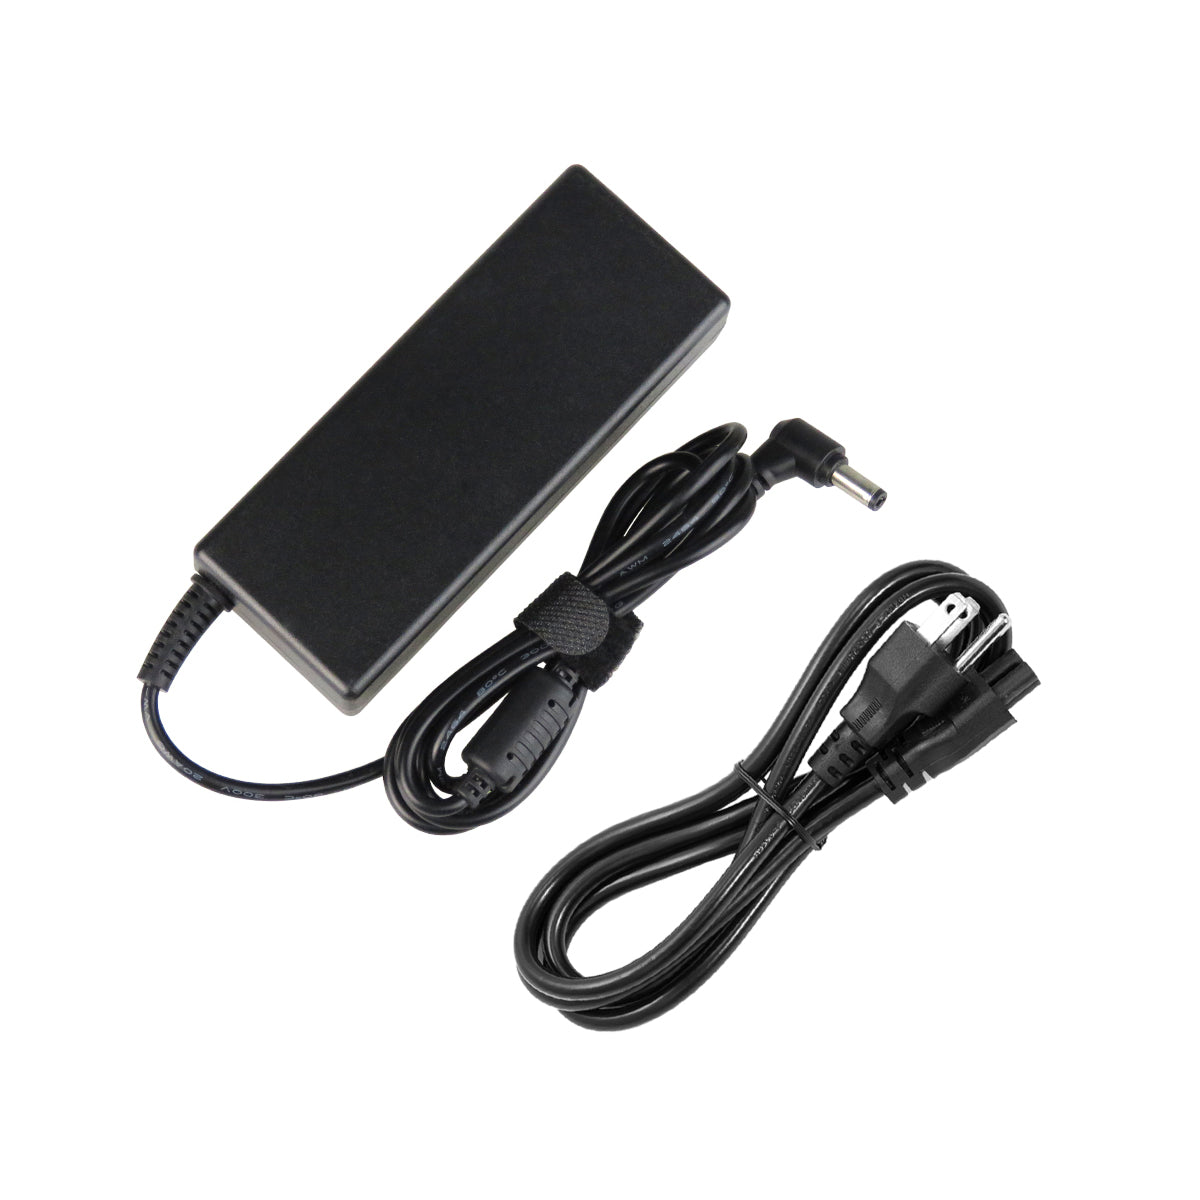 AC Adapter Charger for ASUS F55 Notebook.